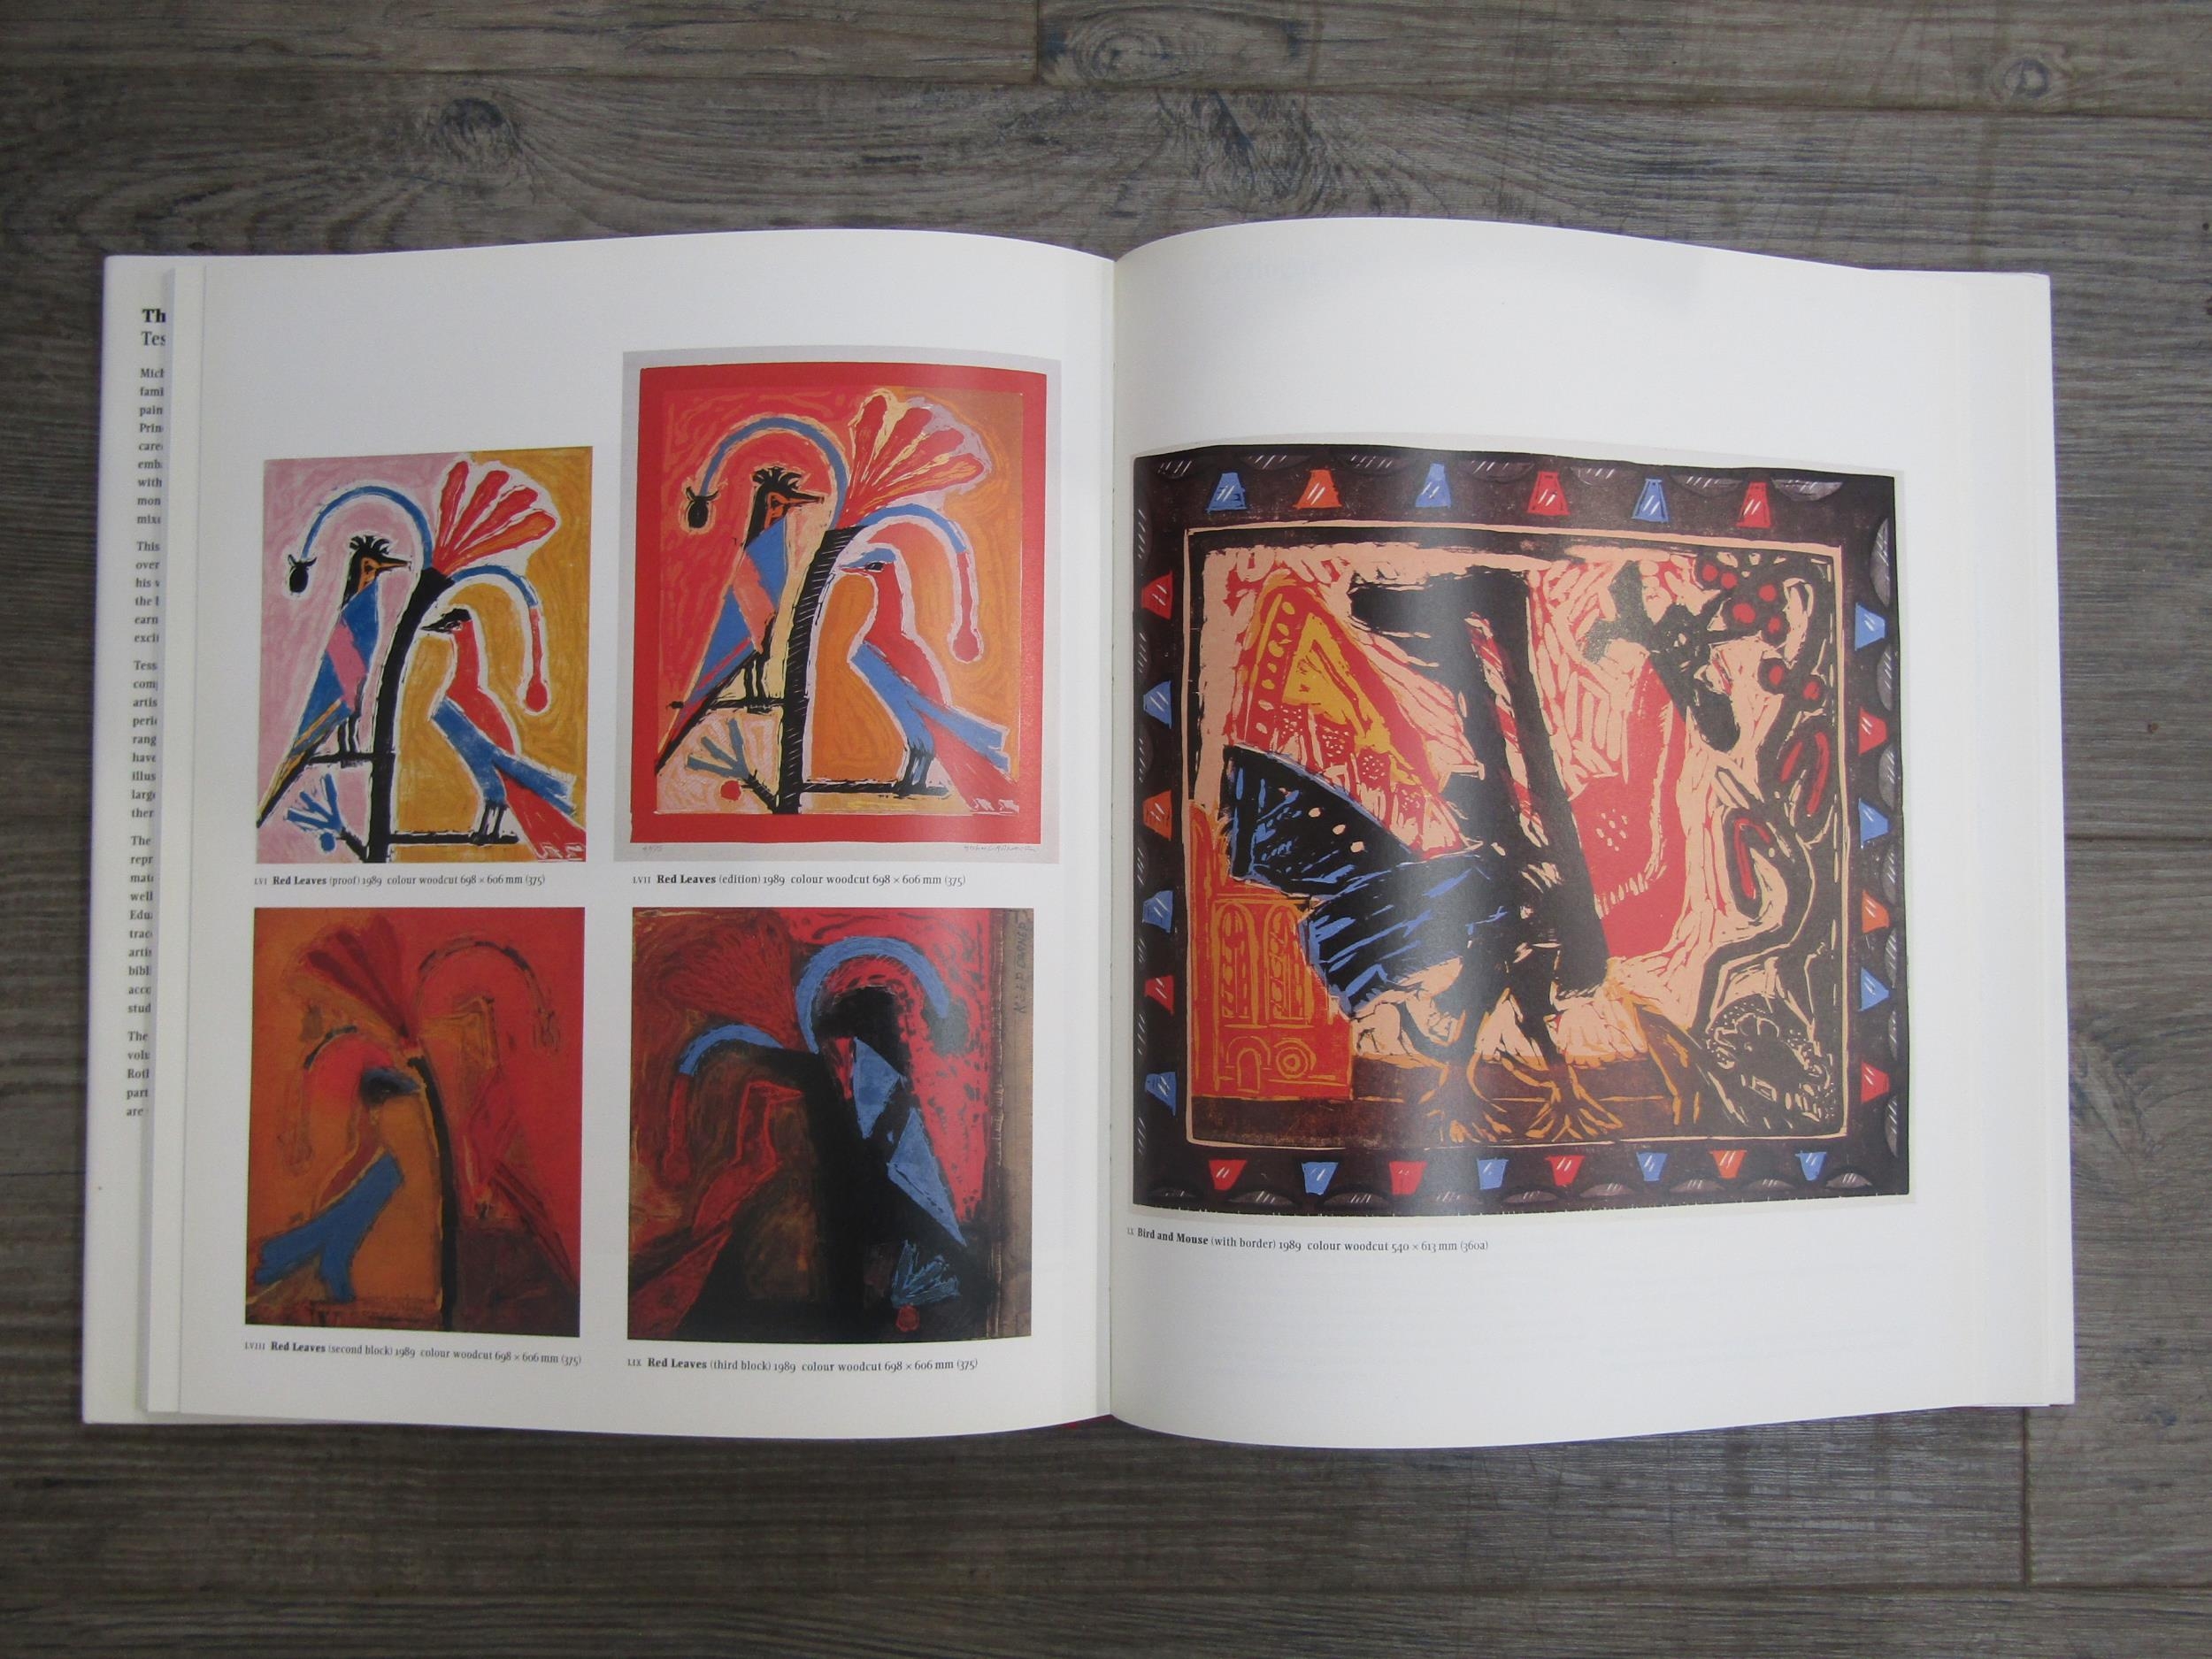 The Prints Of Michael Rothenstein - 1993 hardback book by Tessa Sidey - Image 3 of 3